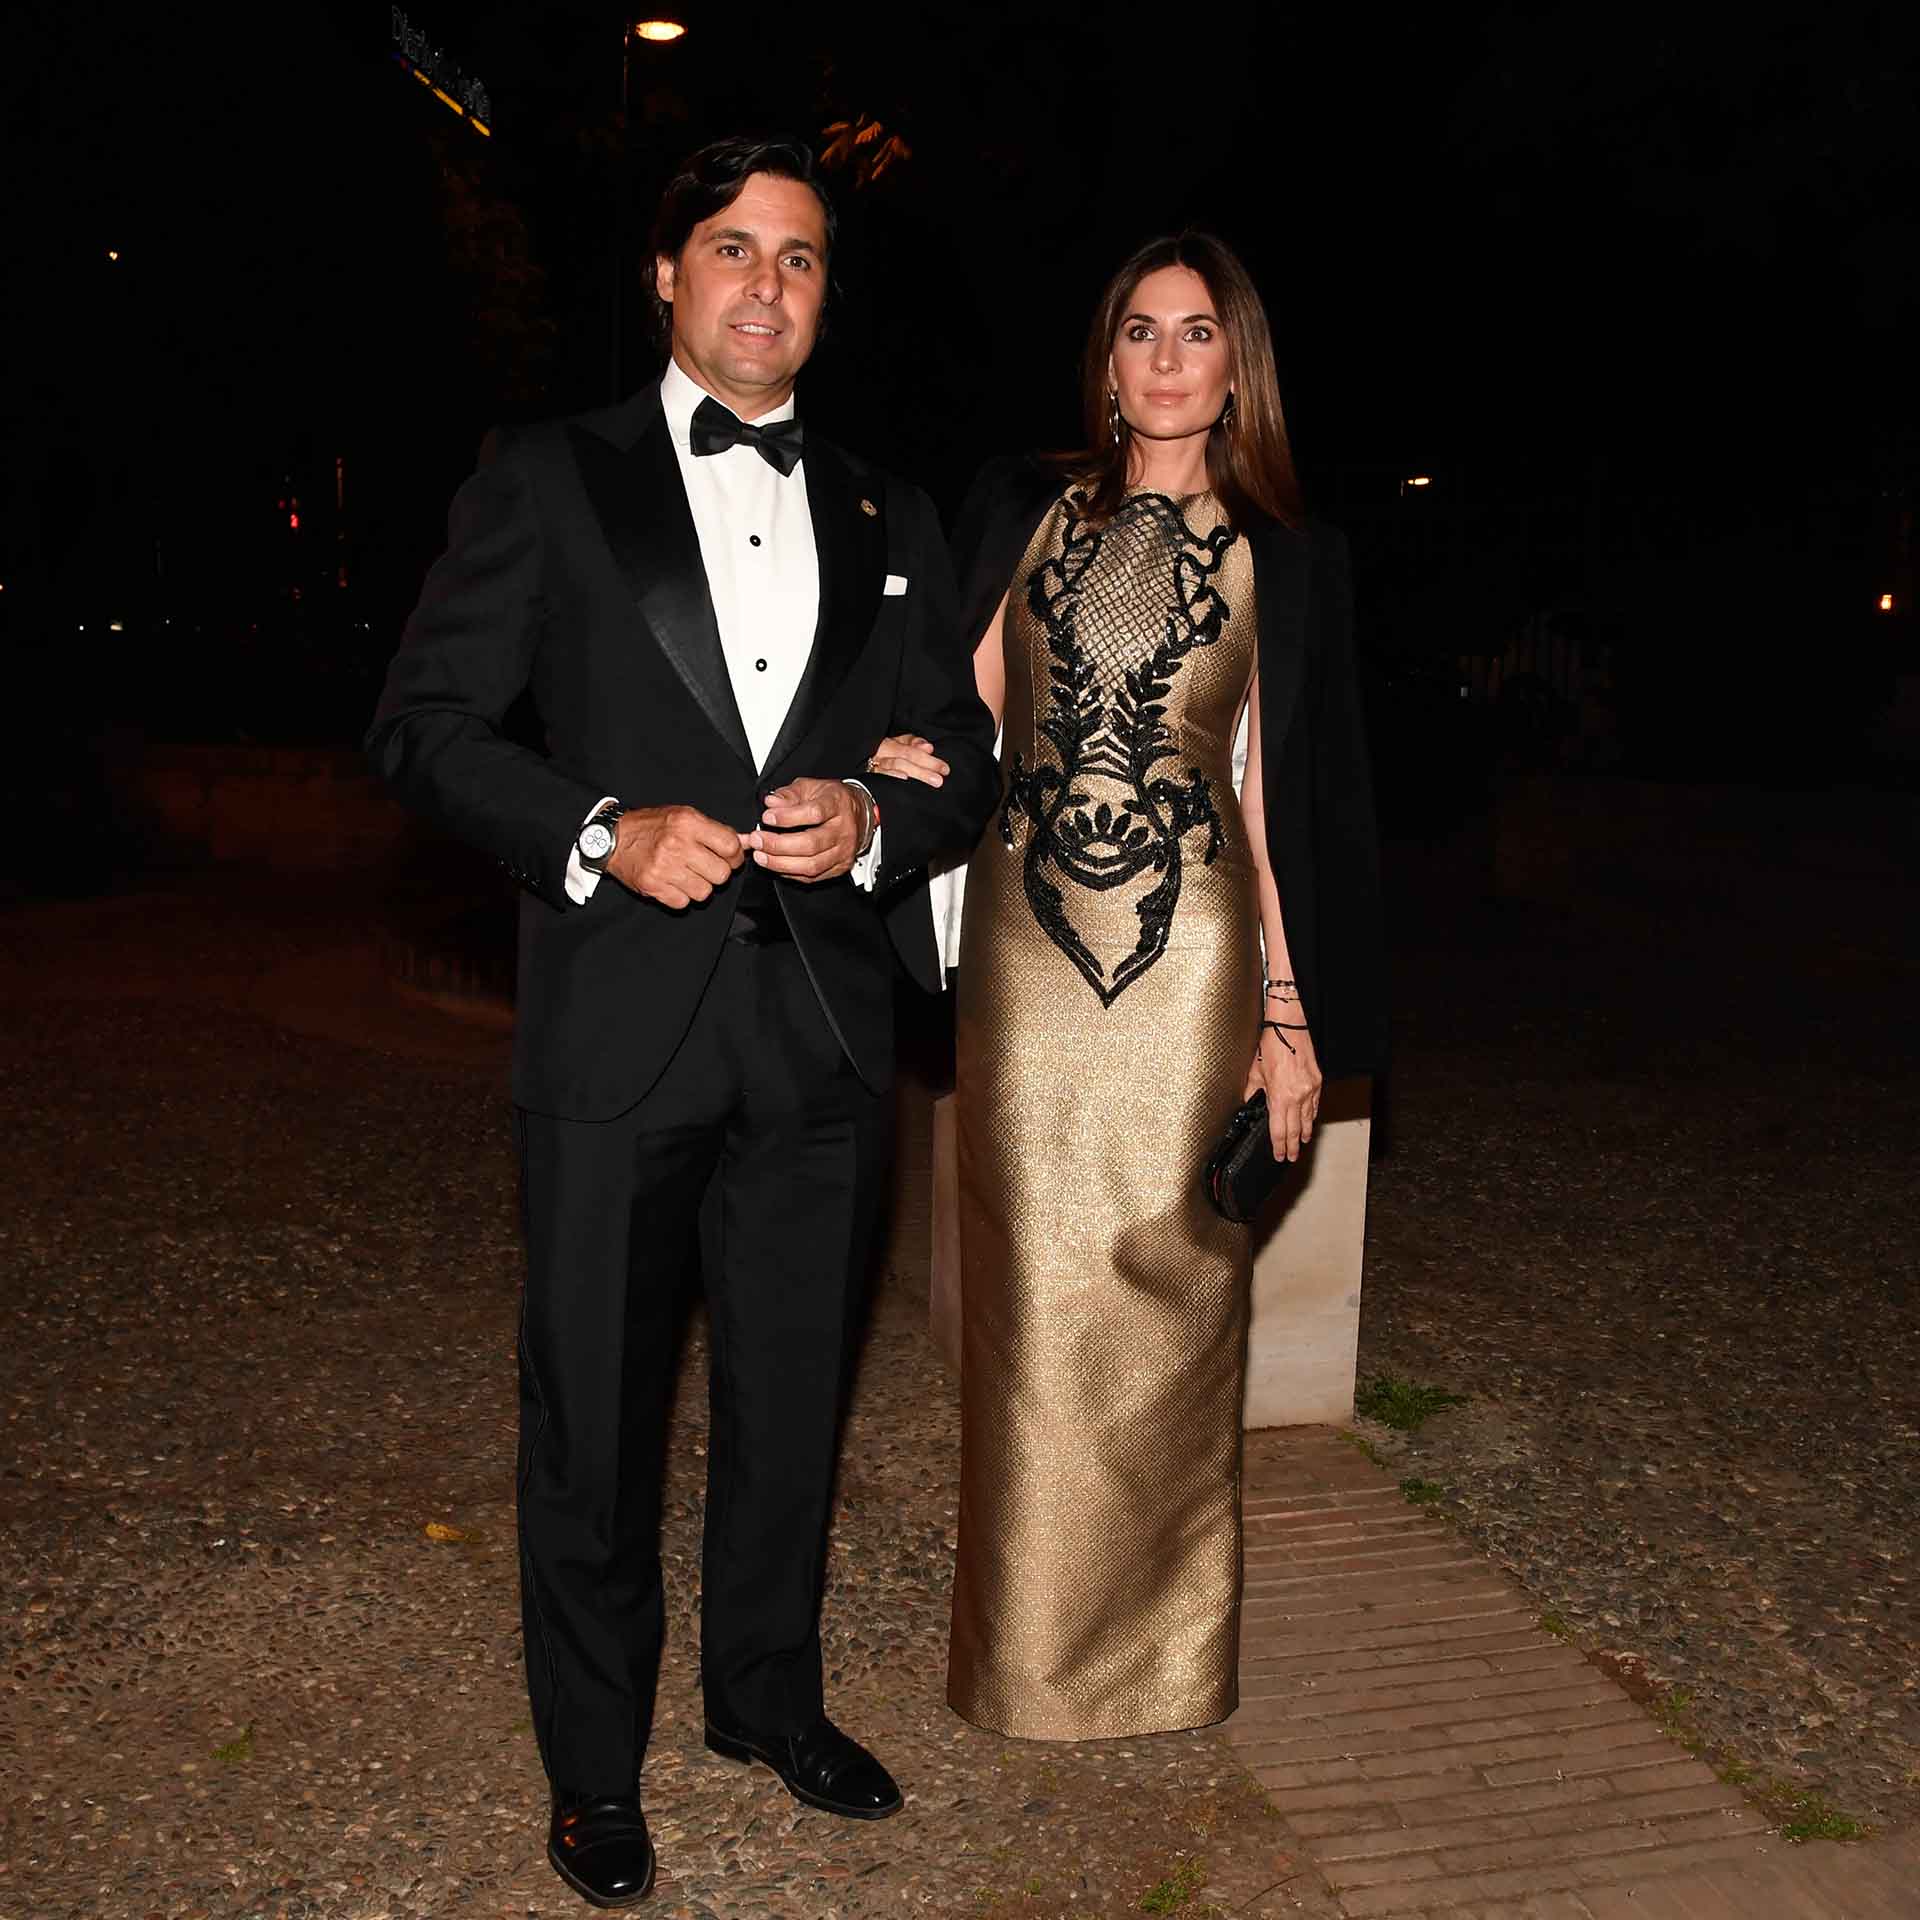 arriving to "Los Enganches" event dinner on occasion of Sevilla Fair in Seville, April 29, 2022